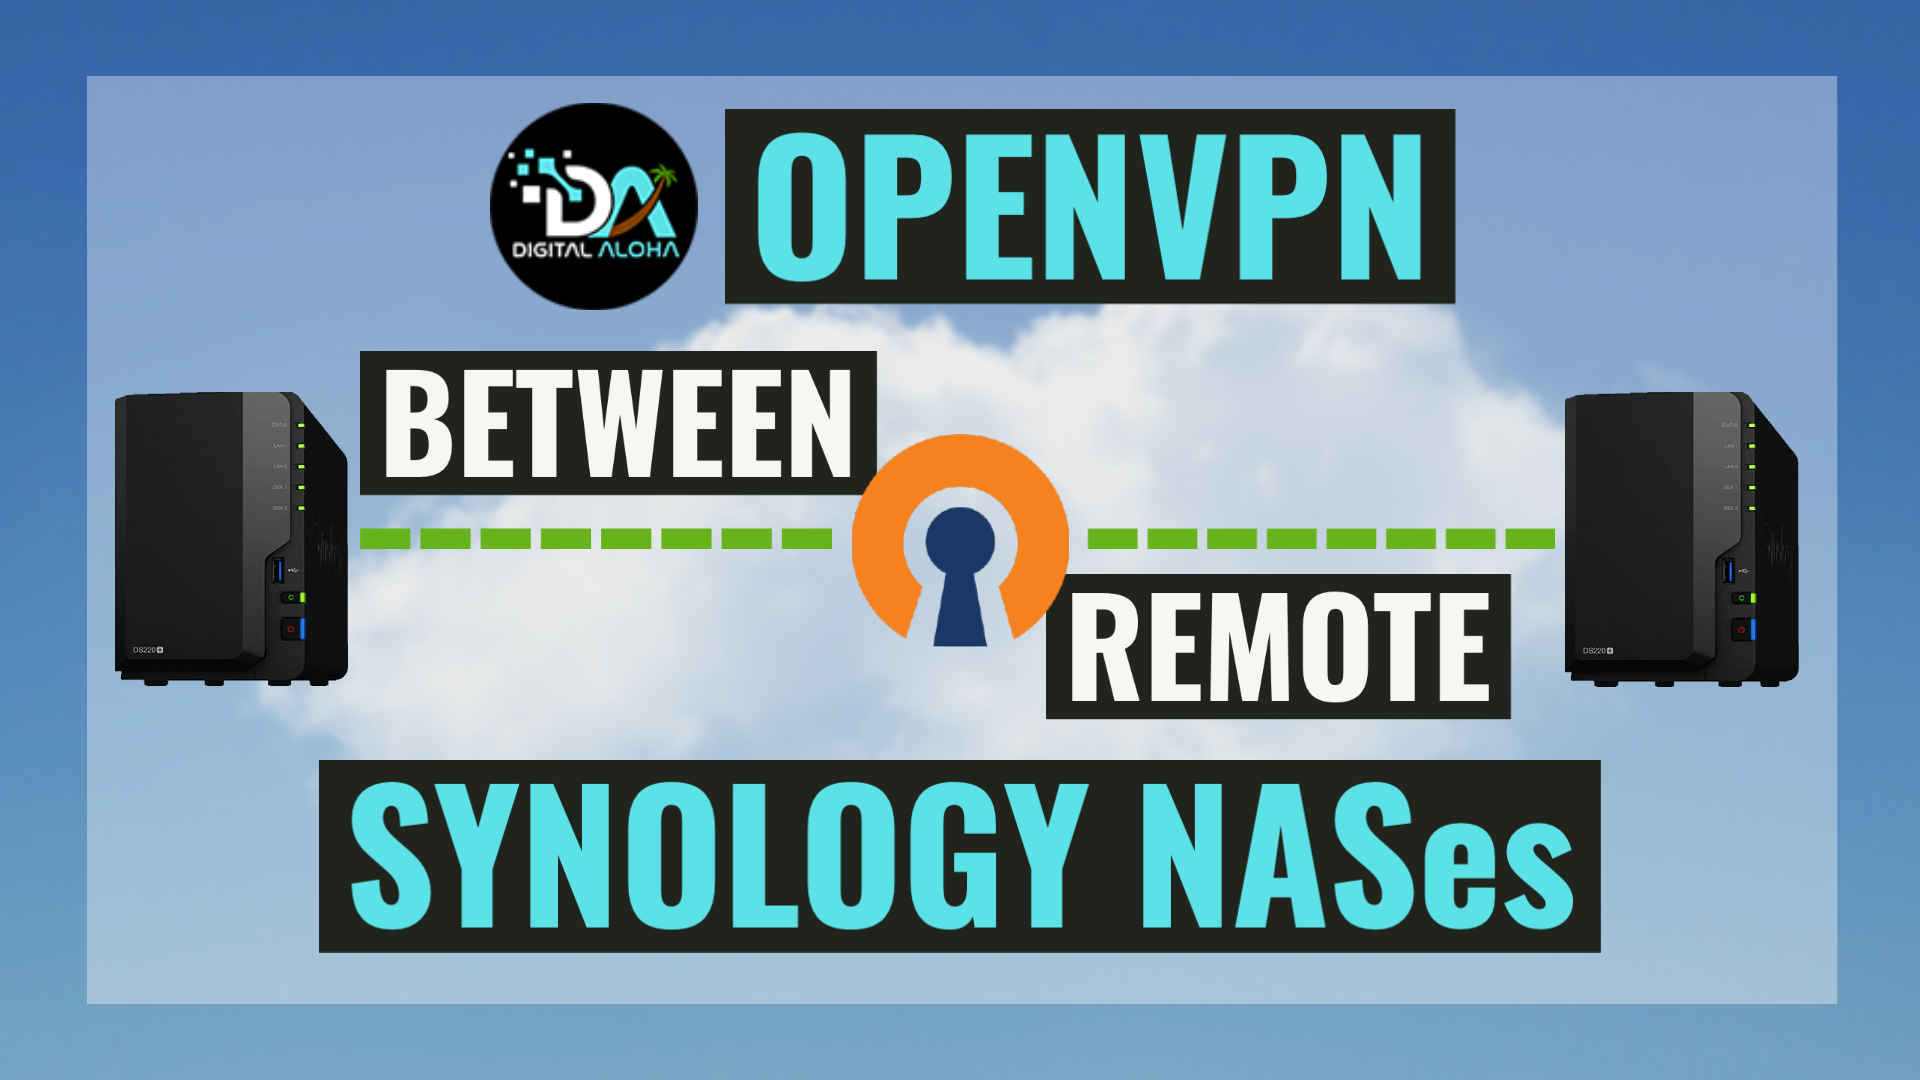 Setup An OpenVPN Connection Between Two Remote Synology NAS Devices